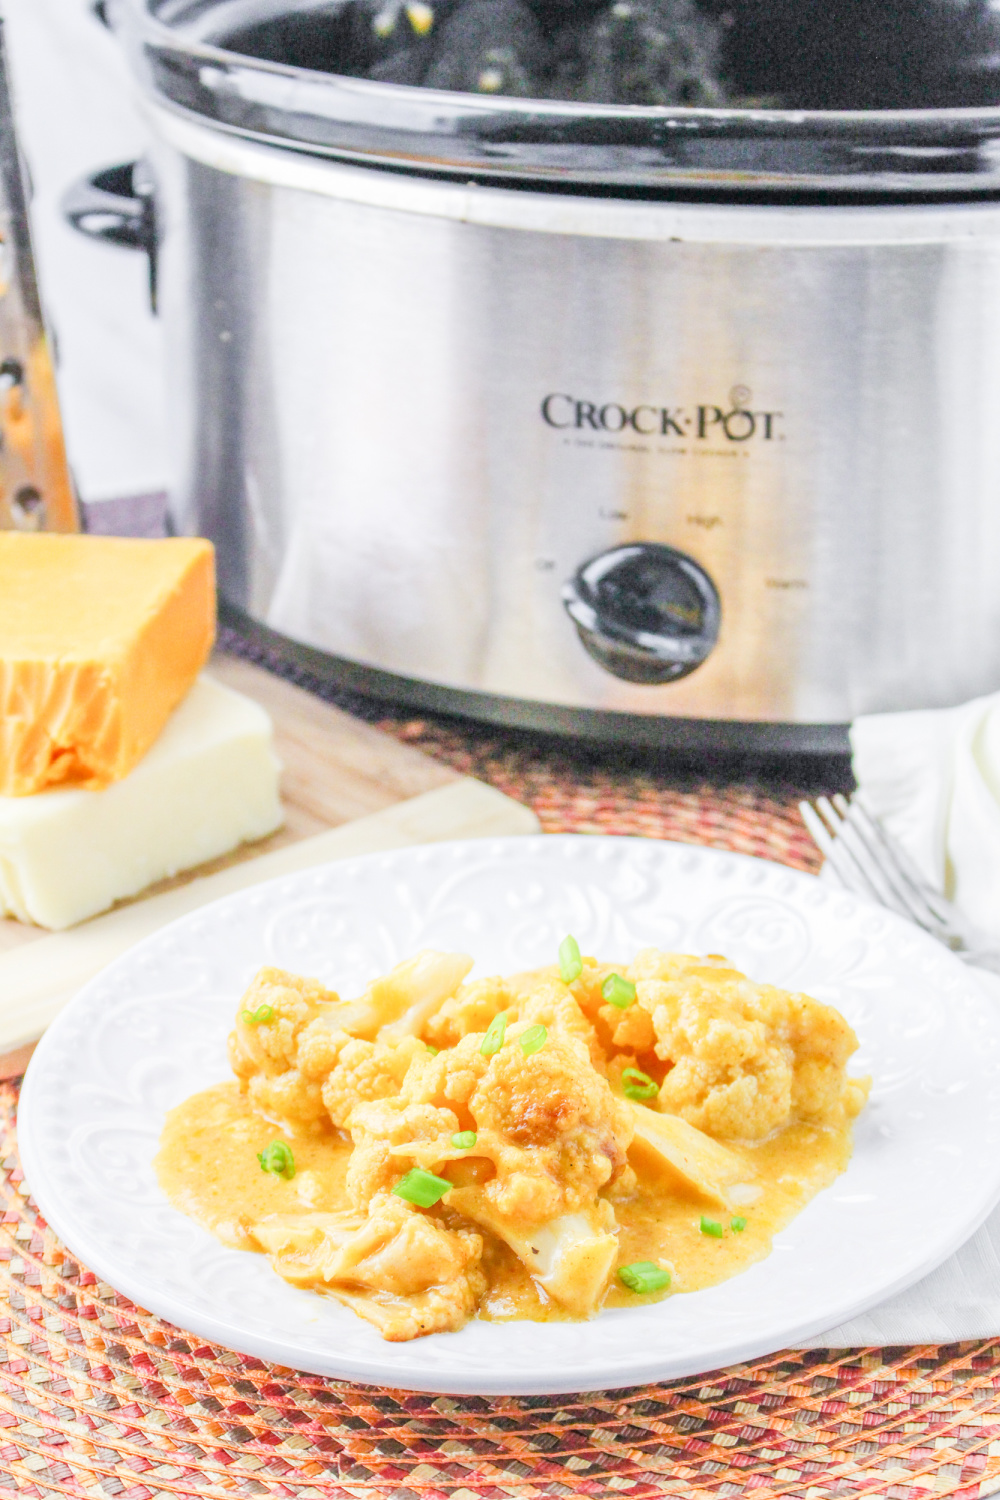 Slow Cooker Cauliflower is an easy flavor-filled side dish for any meal. Cheesy crockpot cauliflower is great for potlucks, too! via @jugglingactmama